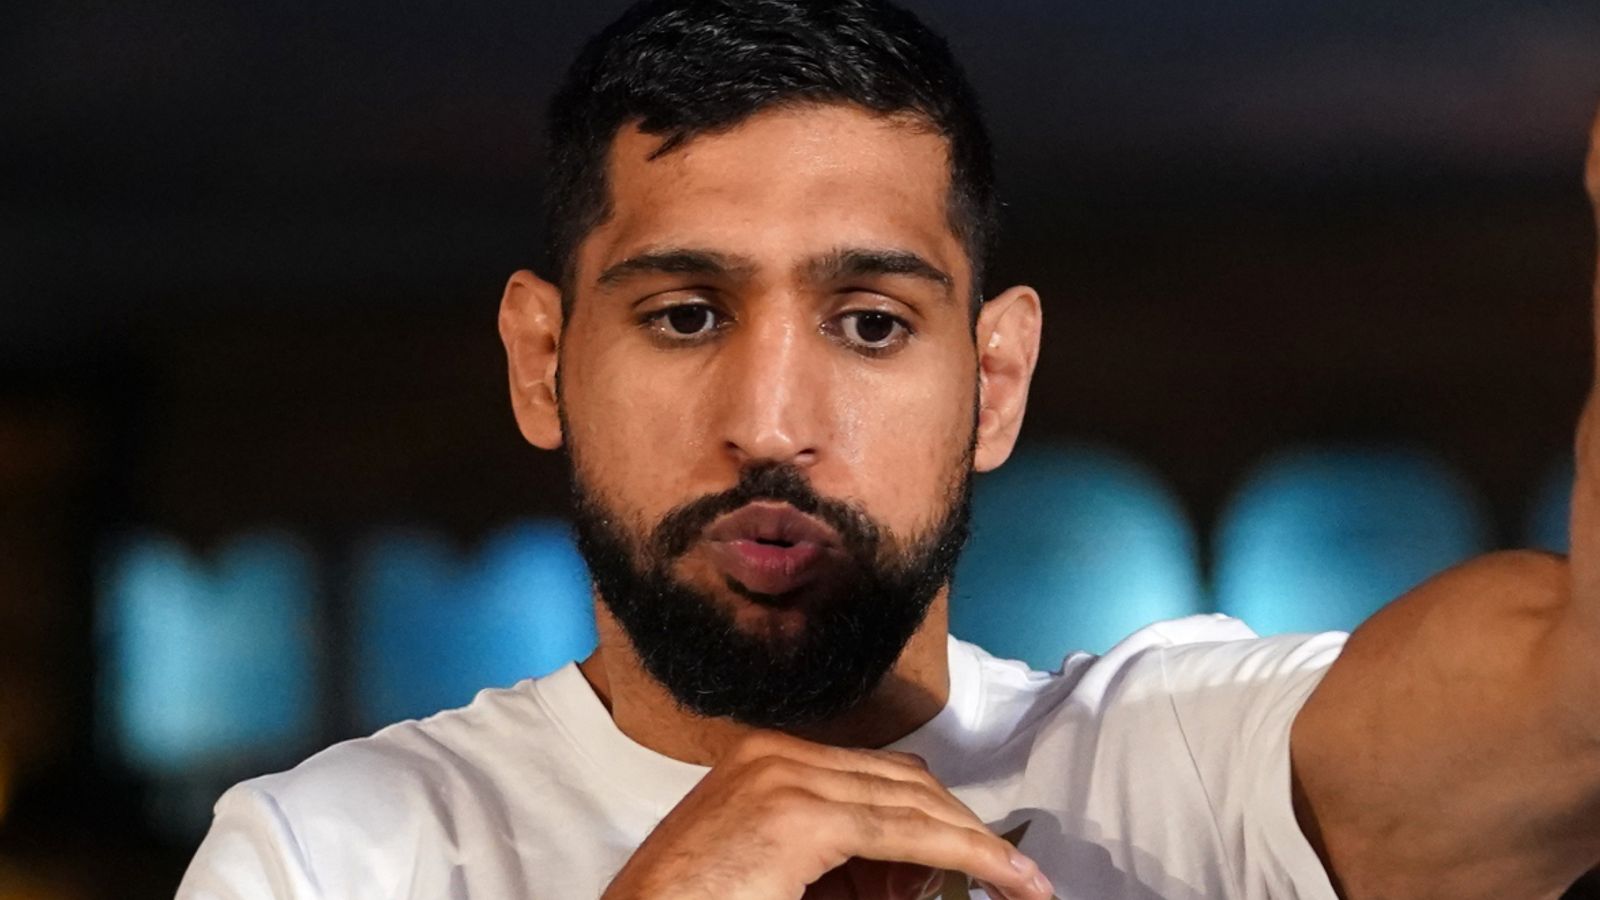 Amir Khan: "I don’t want to be remembered for something like this"